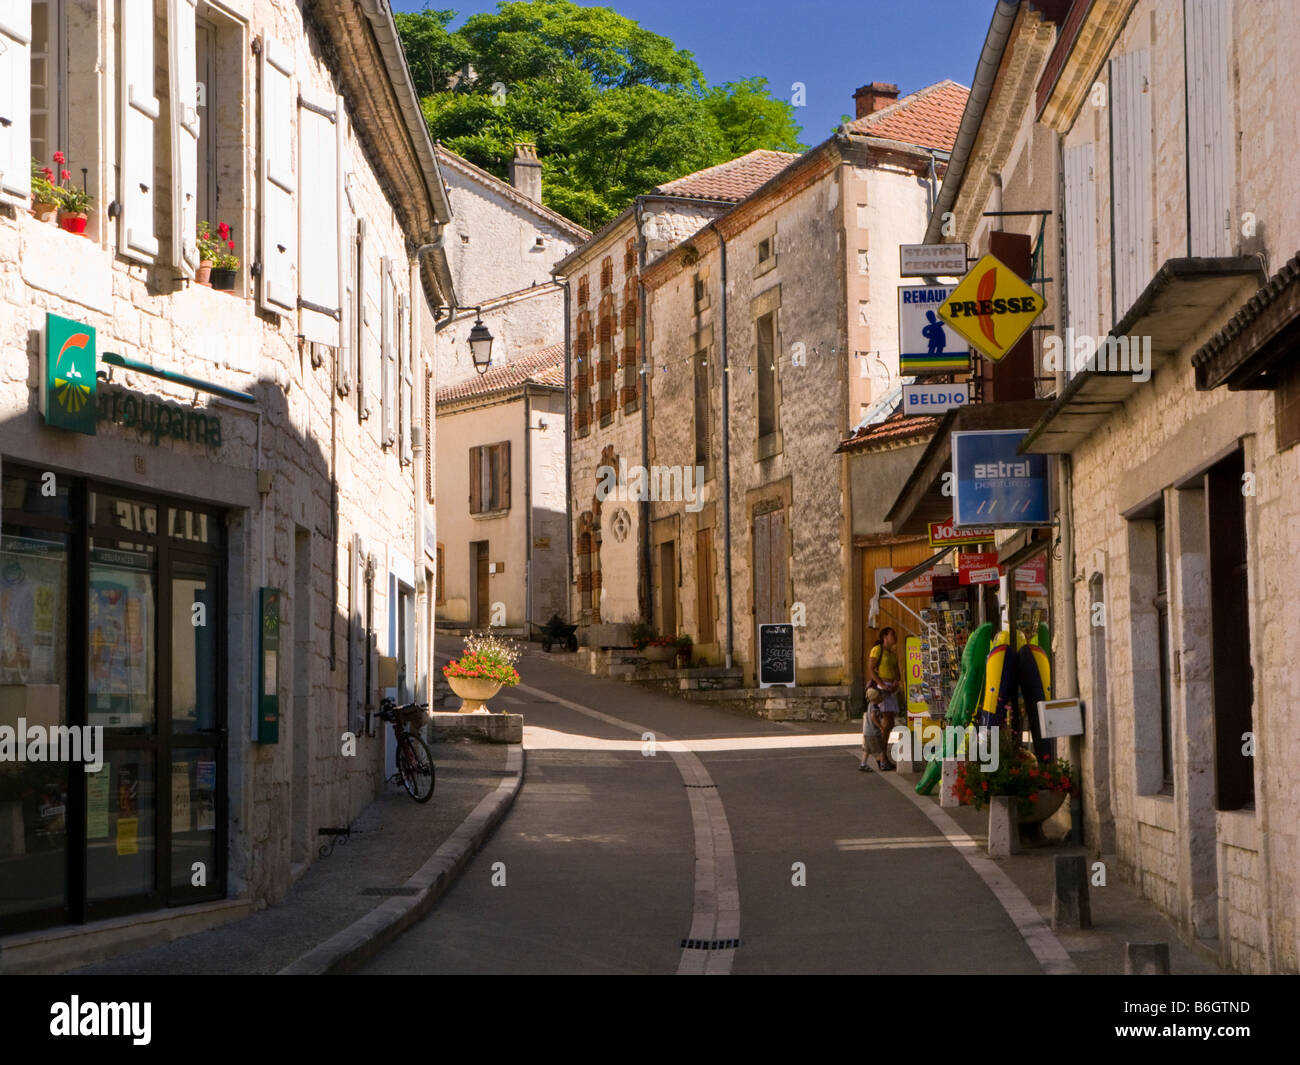 Street with small Tabac shop store in the medieval town of Montaigu de Quercy, Tarn et Garonne, France, Europe Stock Photo